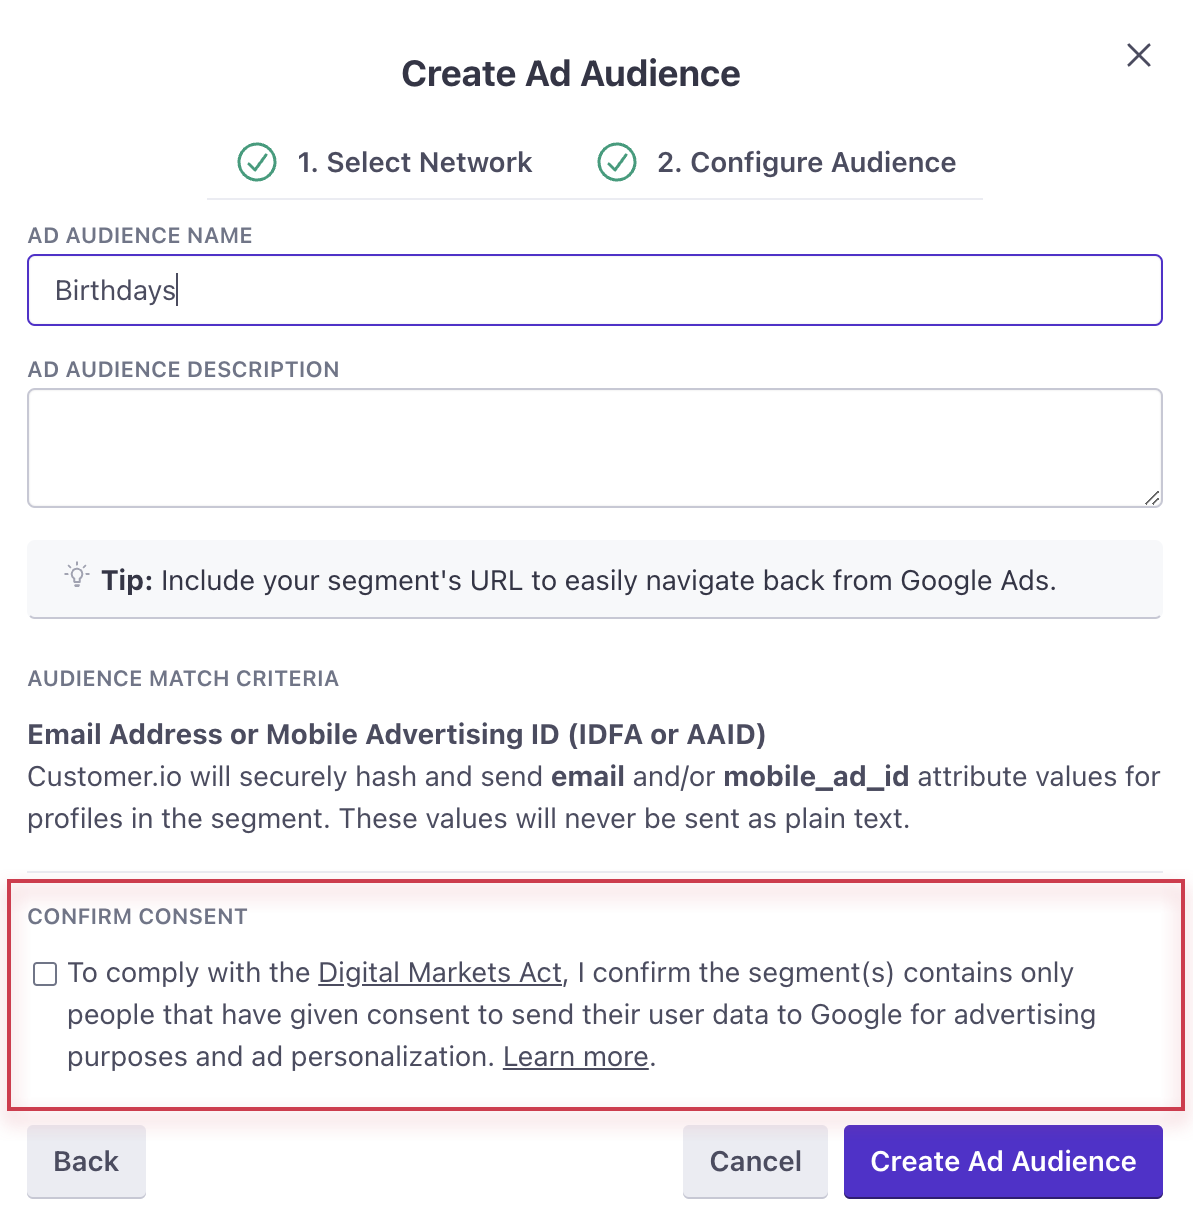 You must confirm that you have your audience's consent to sync a google ads segment.